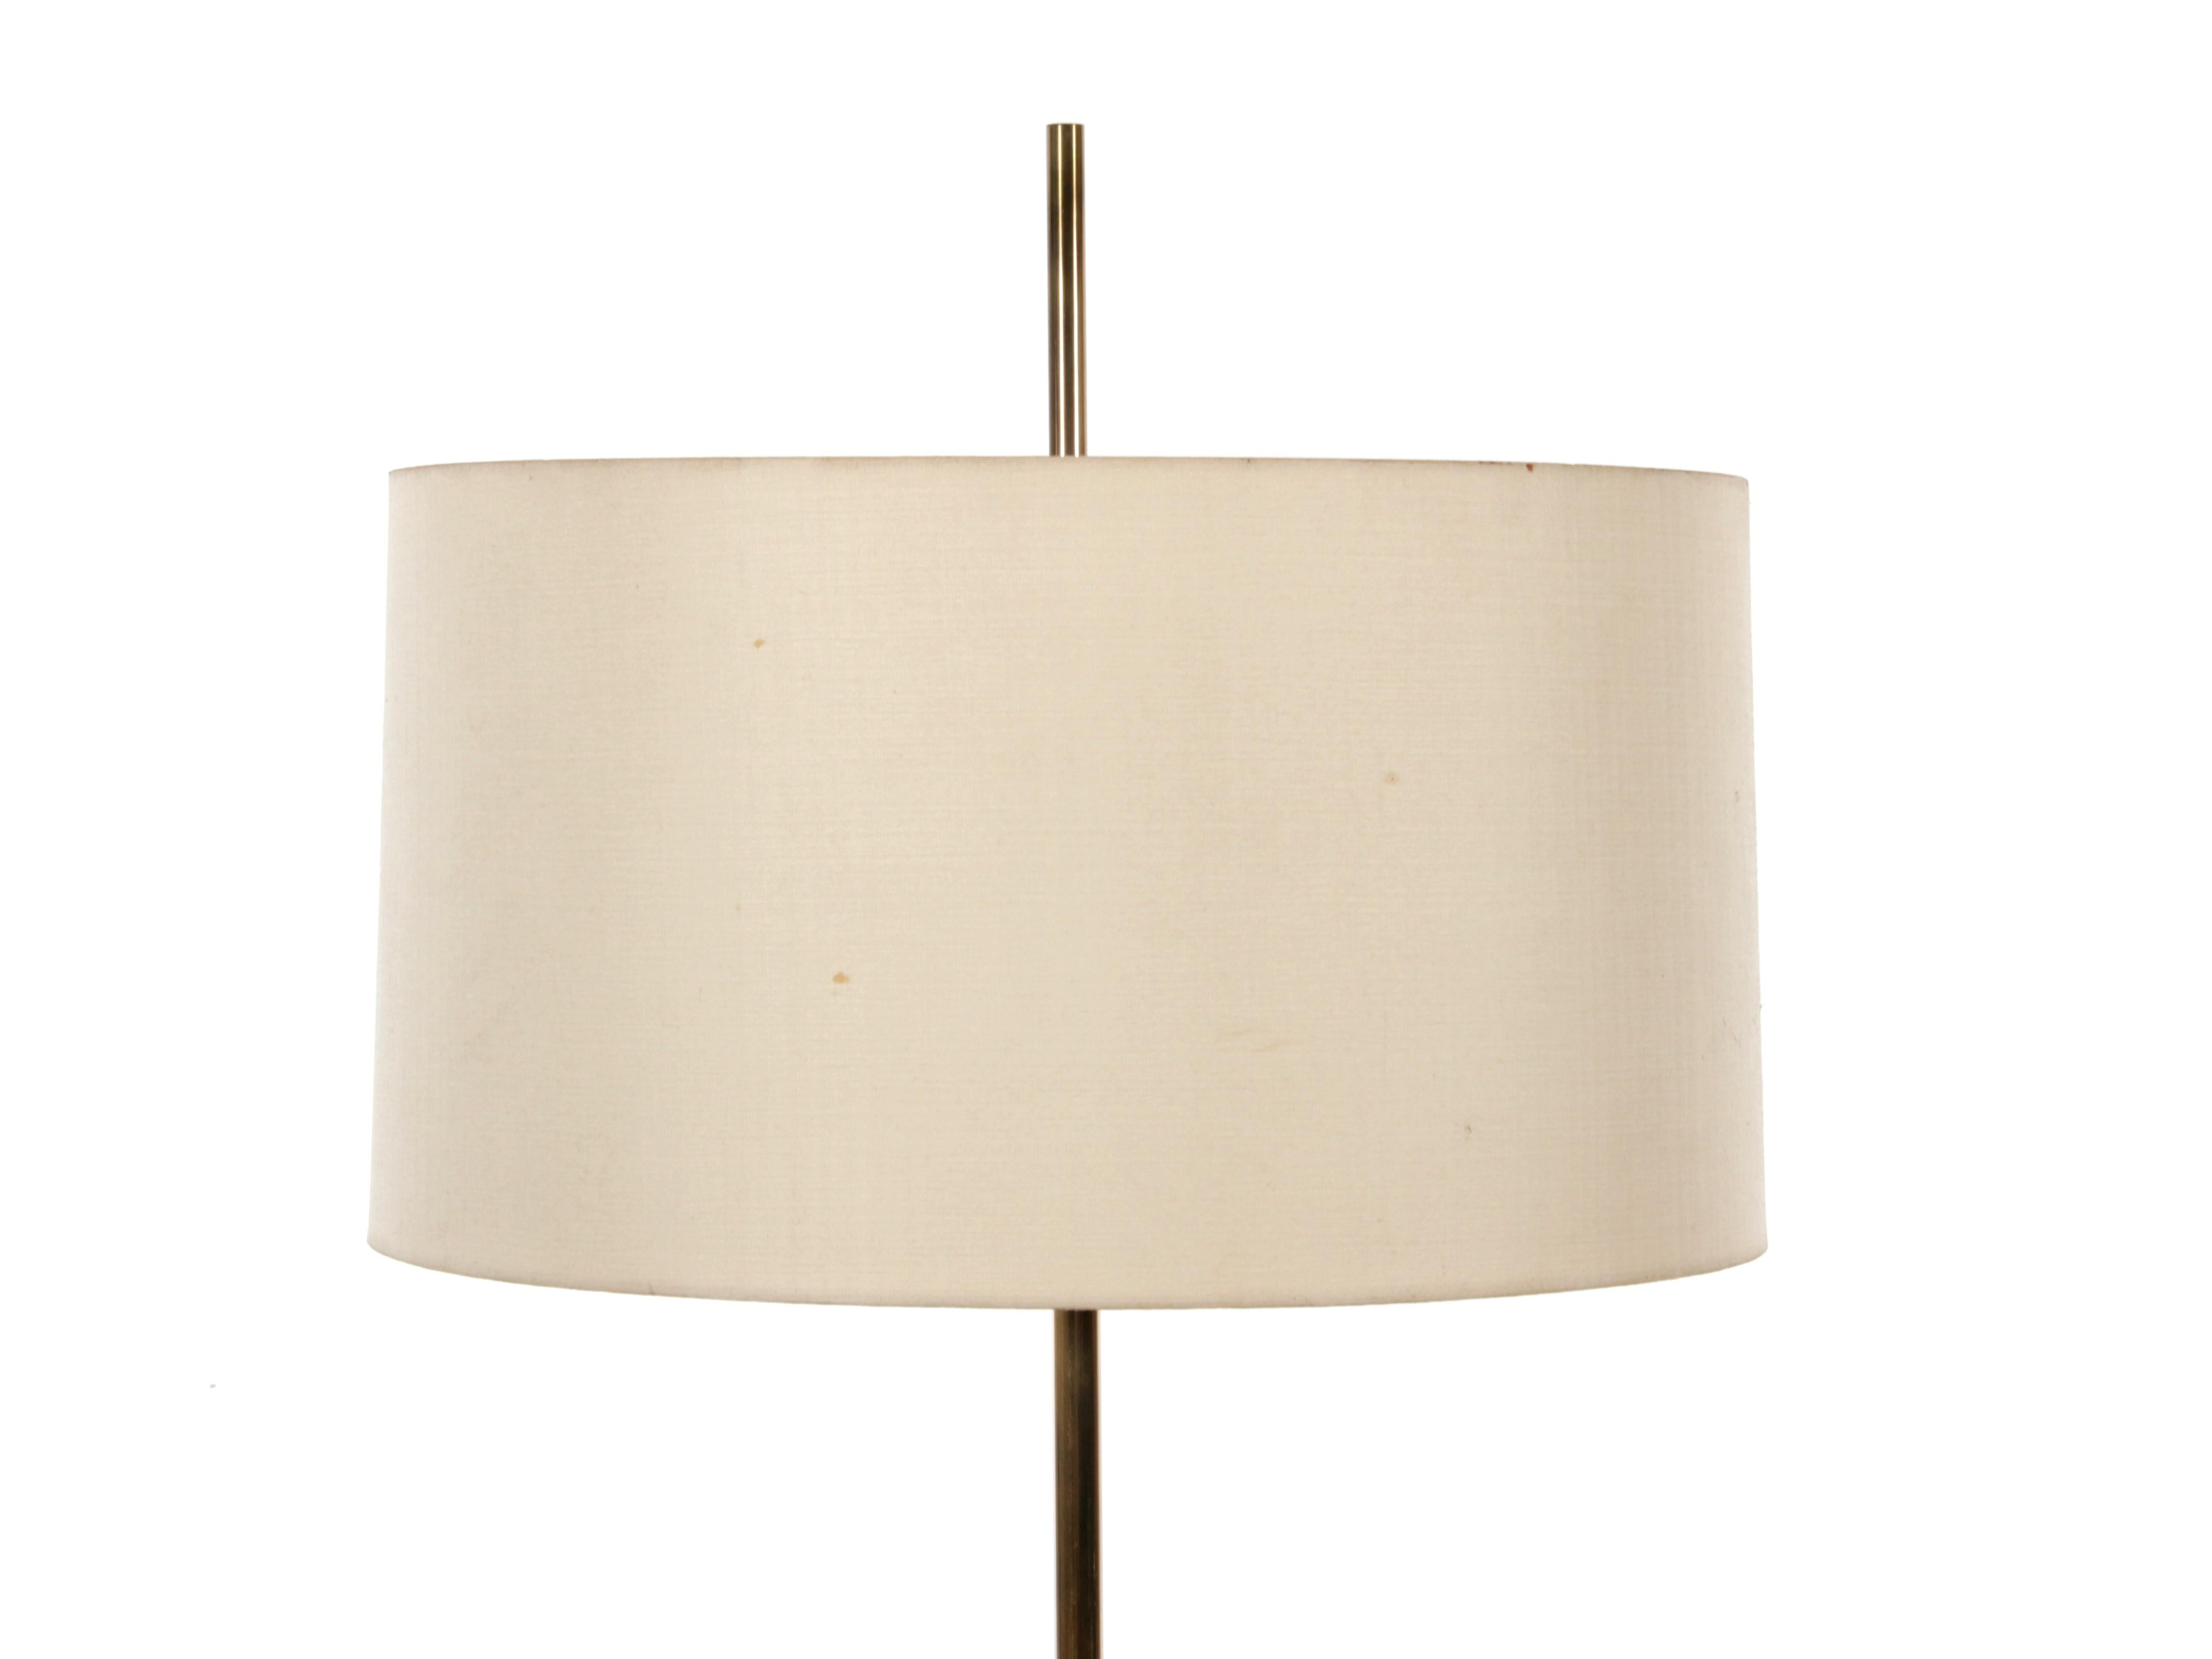 Mid-Century Modern scandinavian floor lamp in brass. 2 pieces available. Price is for 1 item. Comes with original shade.